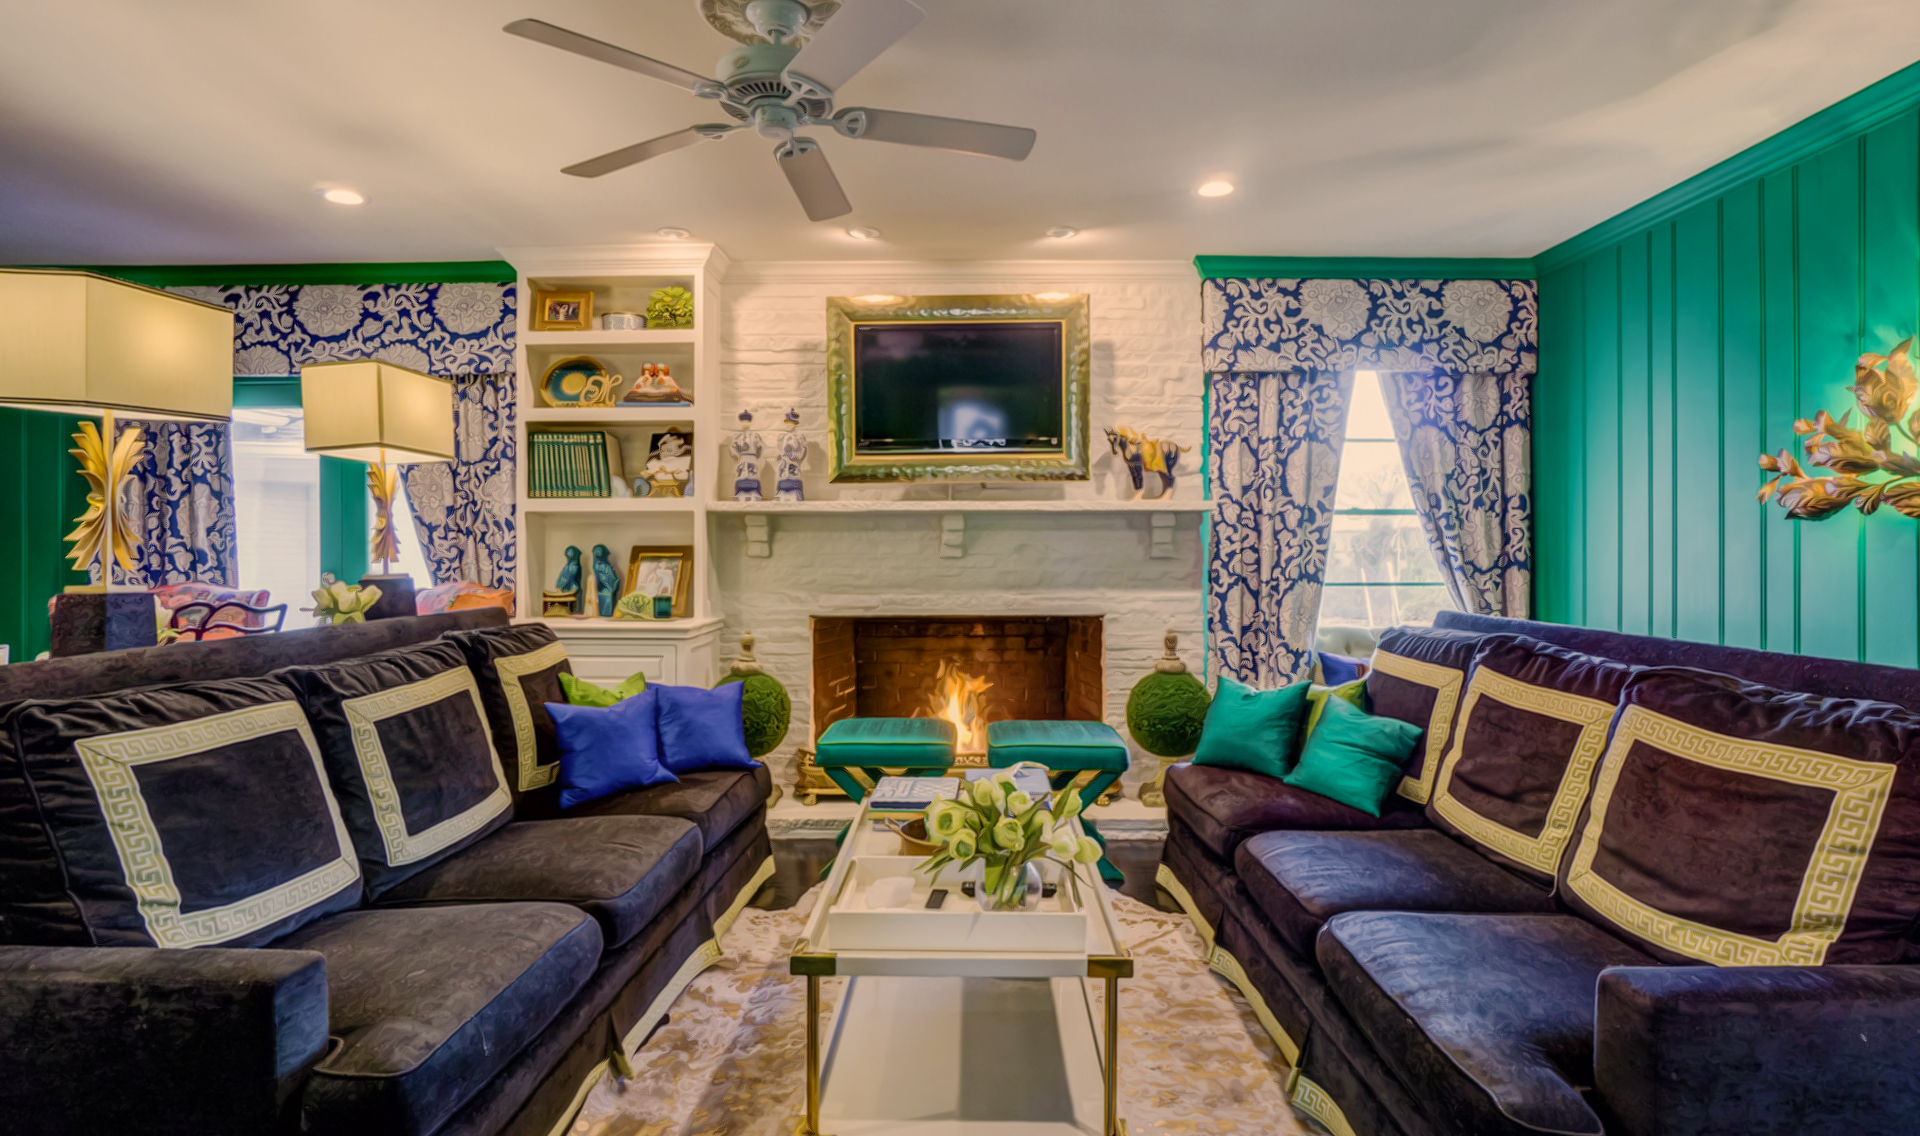 INT. BLUE GREEN LIVING ROOM – DAY